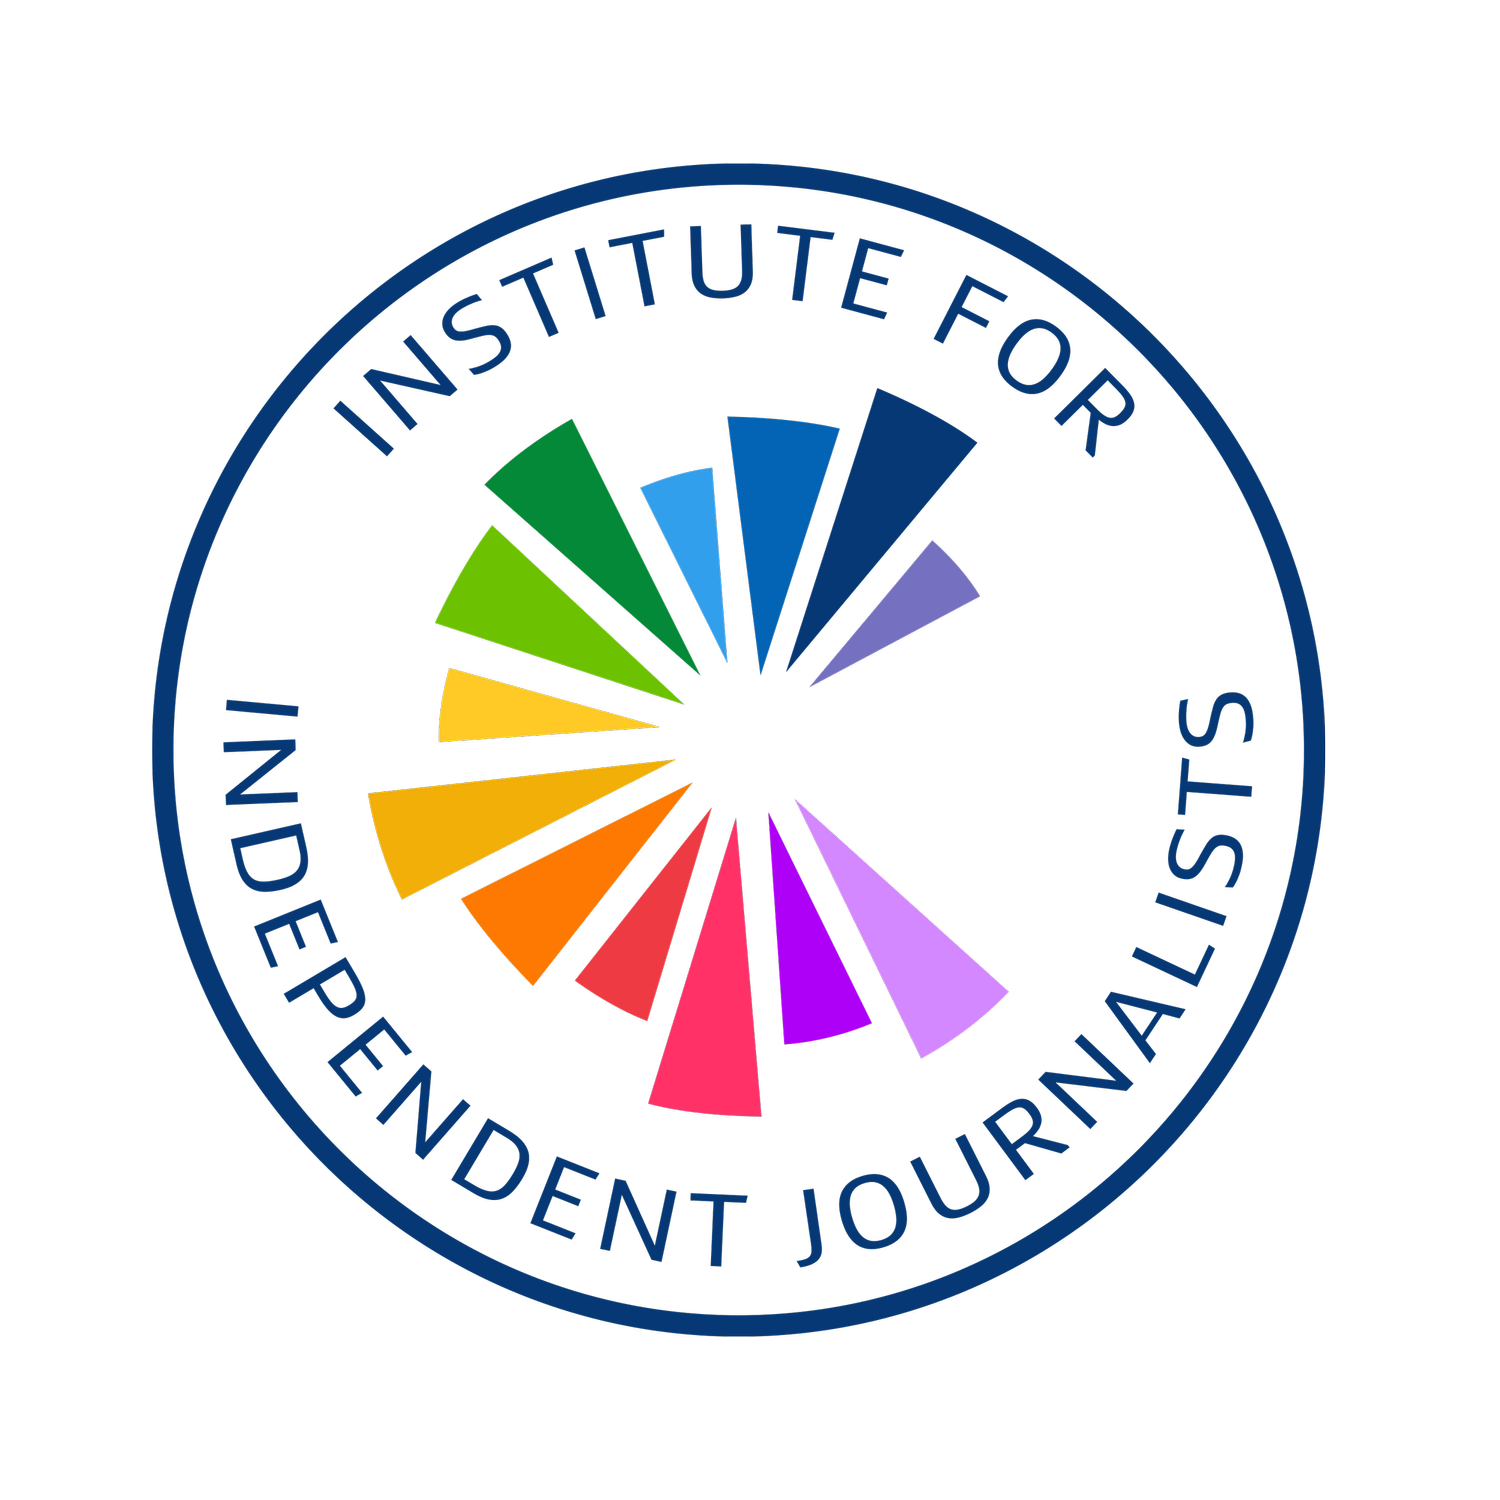 The Institute for Independent Journalists